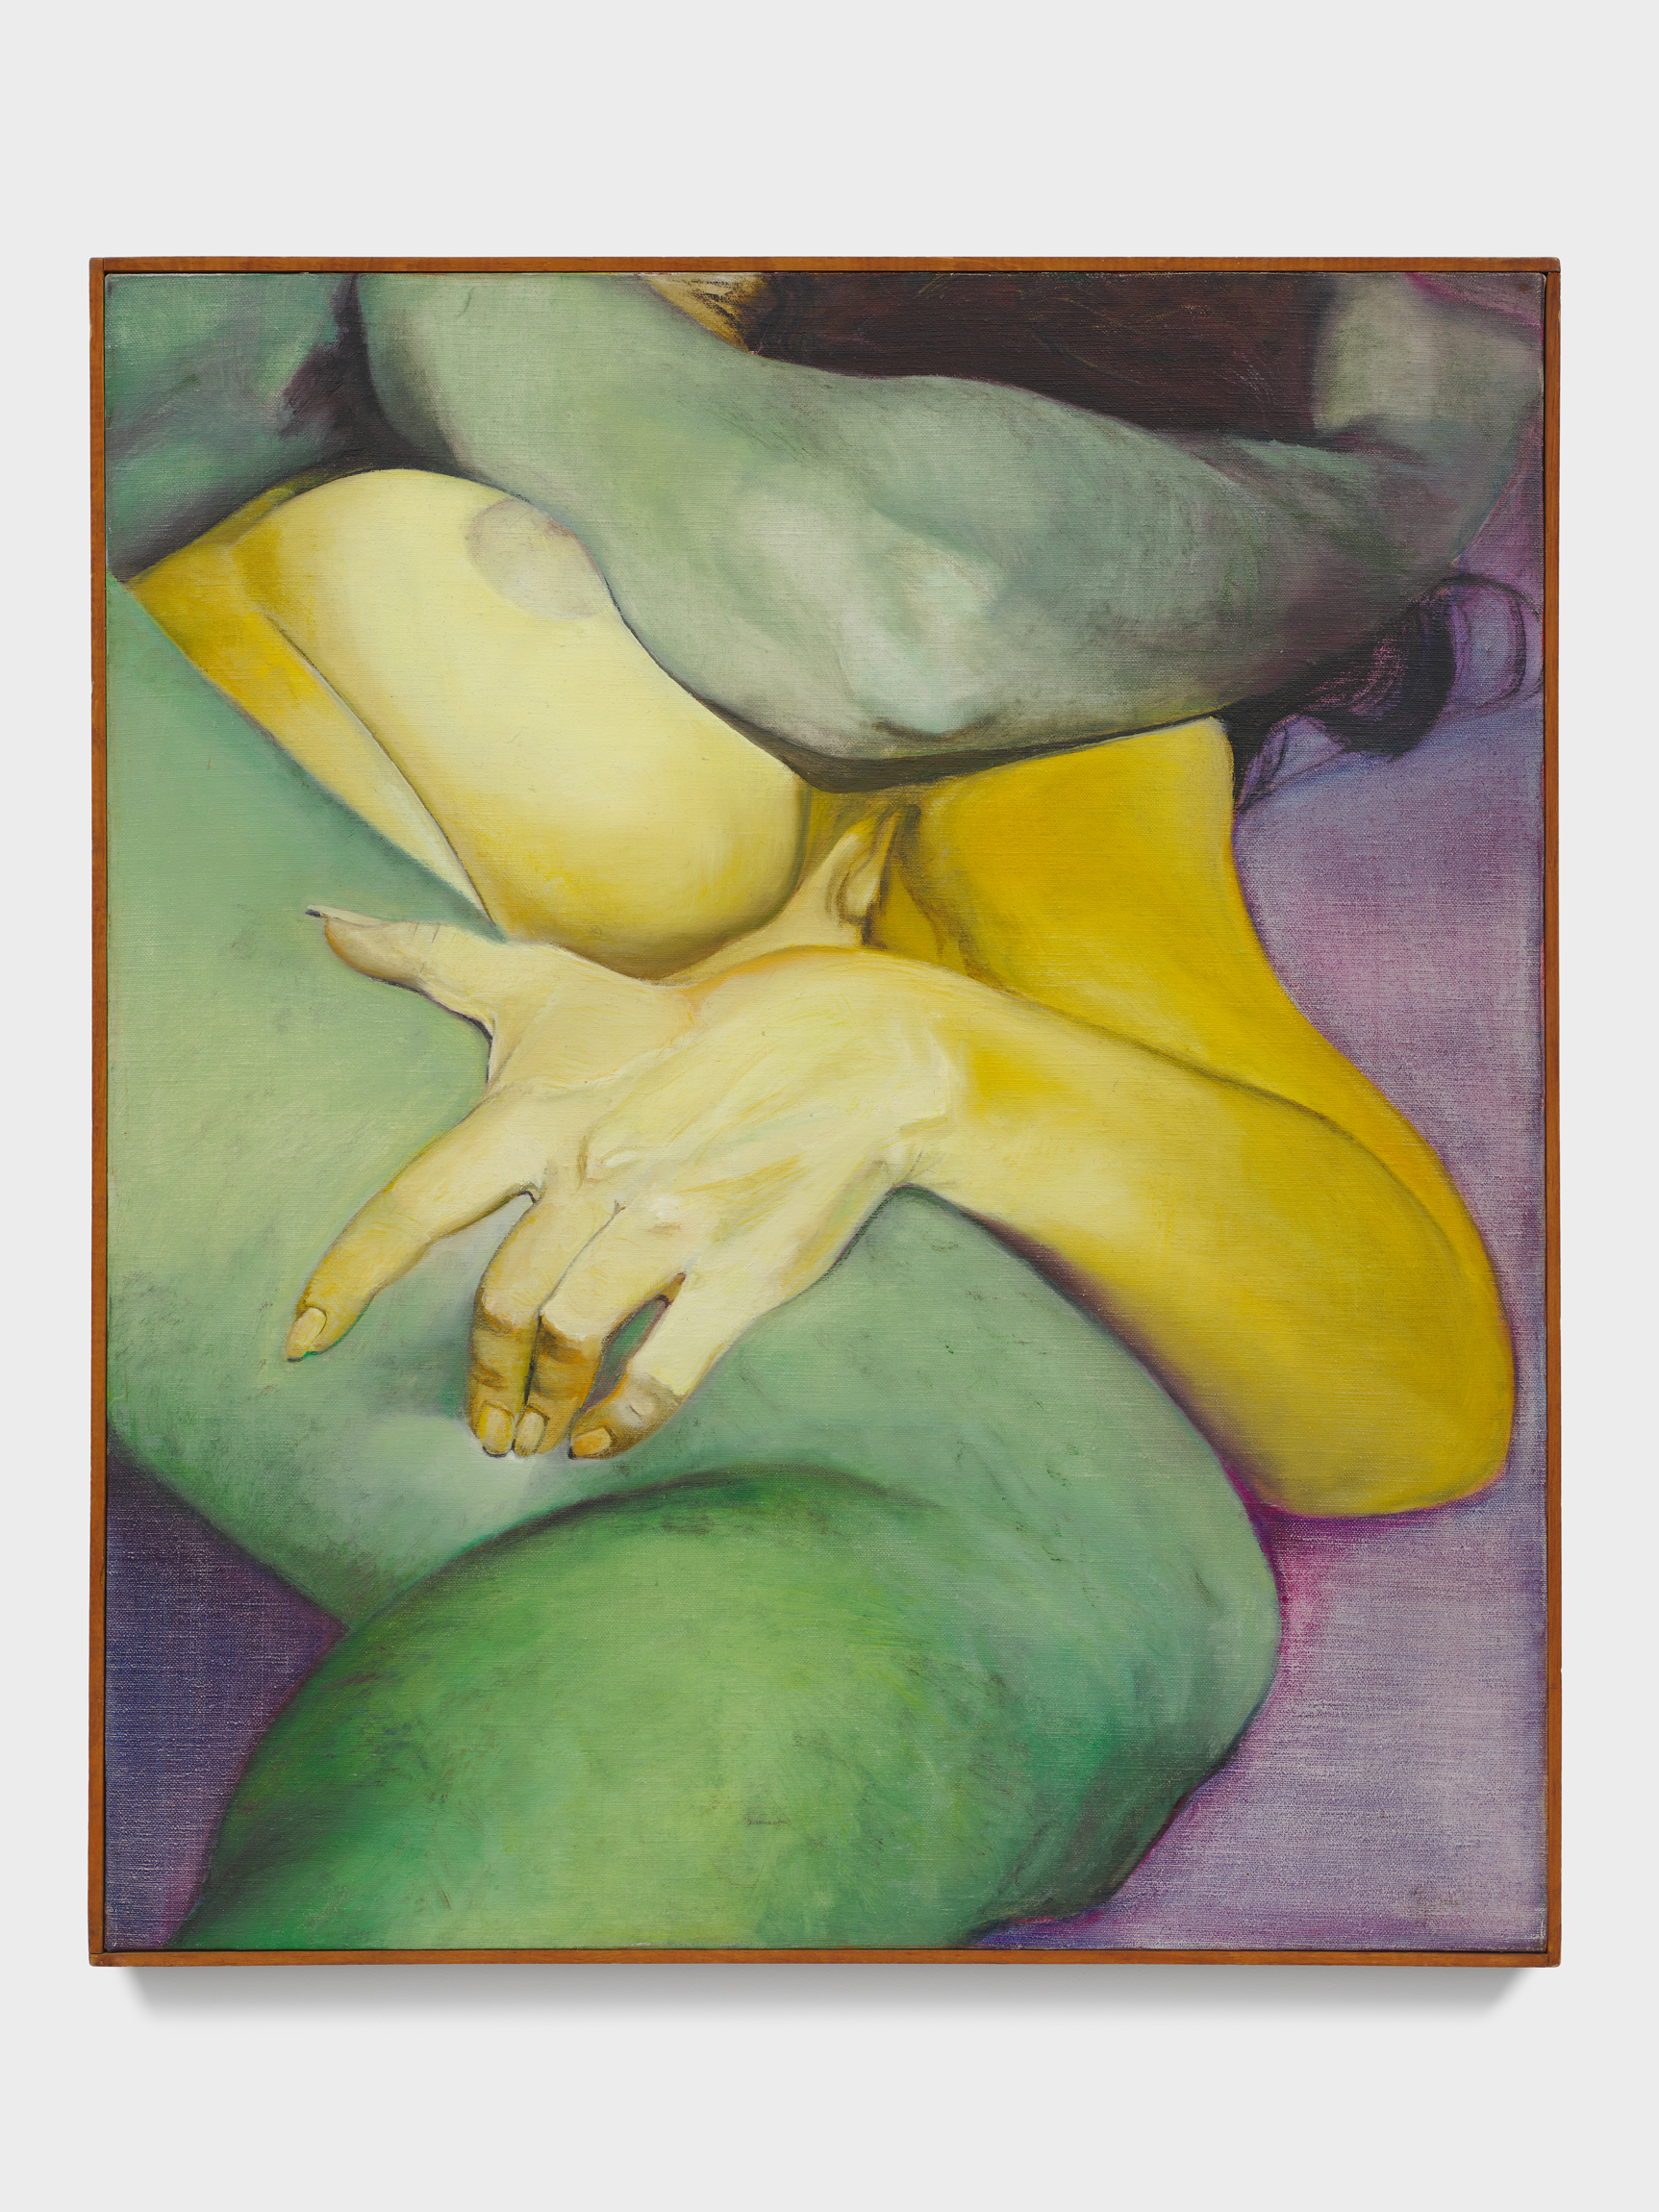 Work of the Week: Joan Semmel’s ‘Hold Tight’